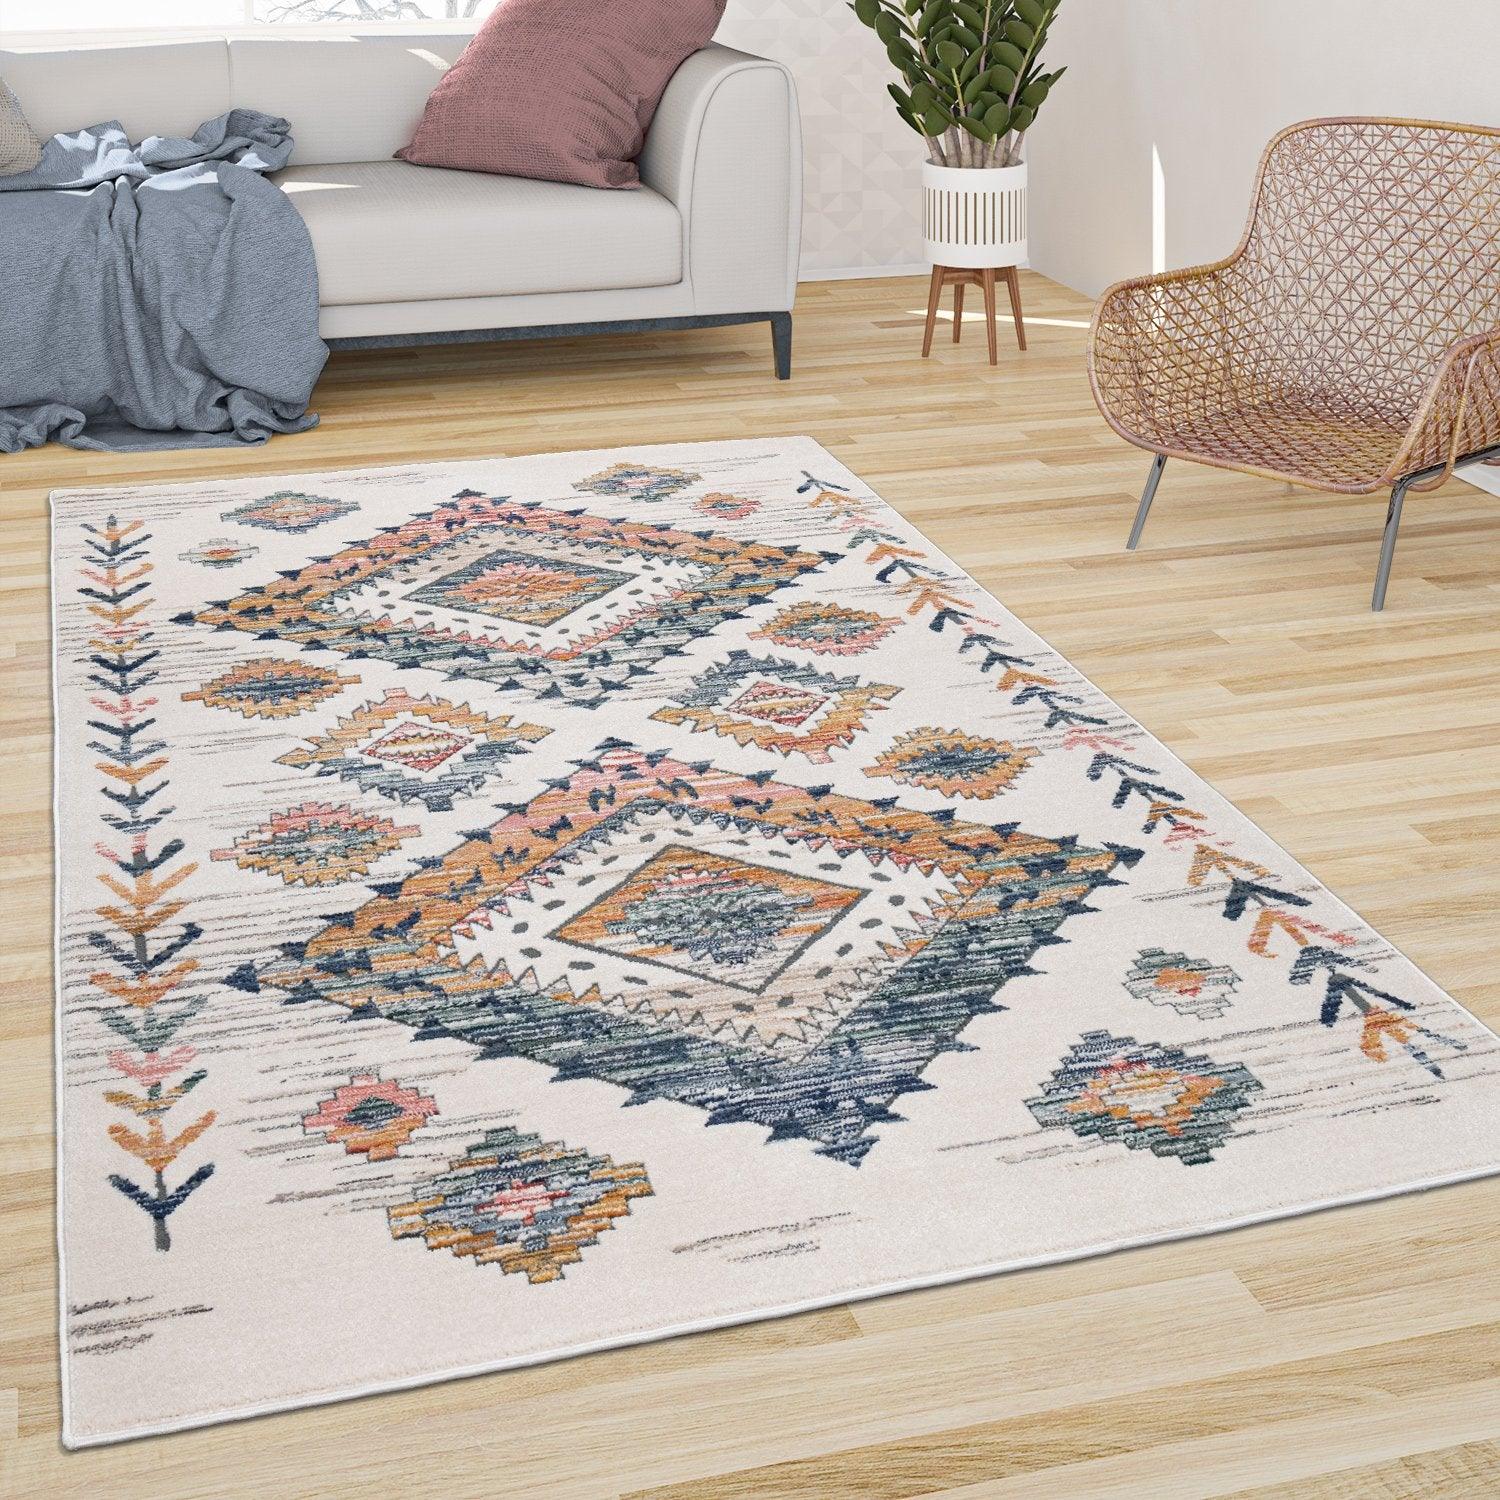 Modern Area Rug for Living Room Ethnic Boho Style in Cream - RugYourHome